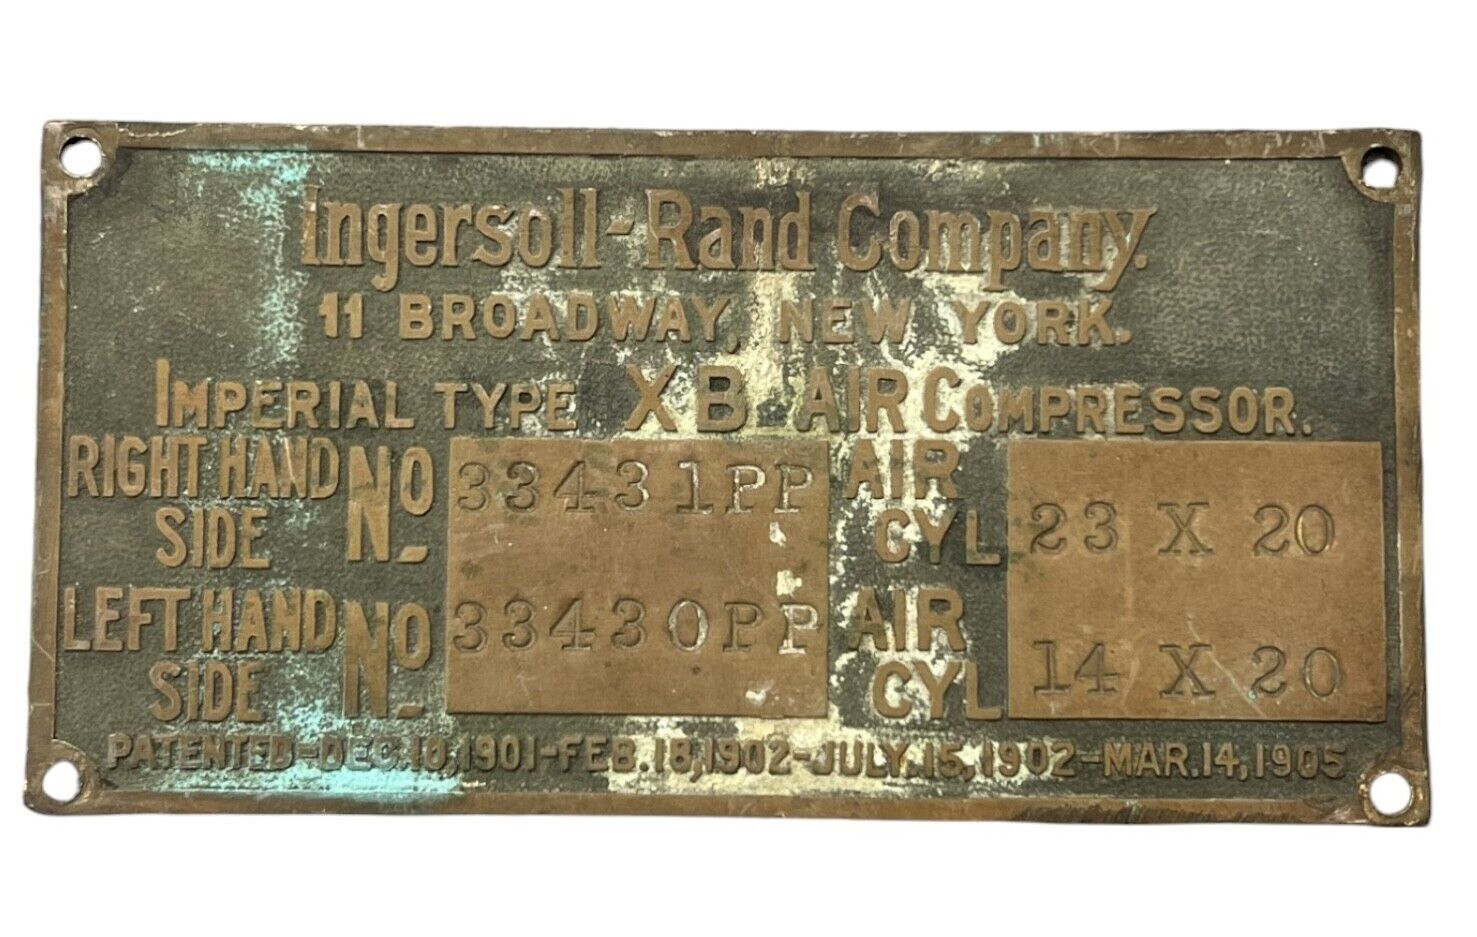 VINTAGE CAST IRON PLAQUE SIGN INGERSOLL RAND COMPANY USA GHOST TOWN